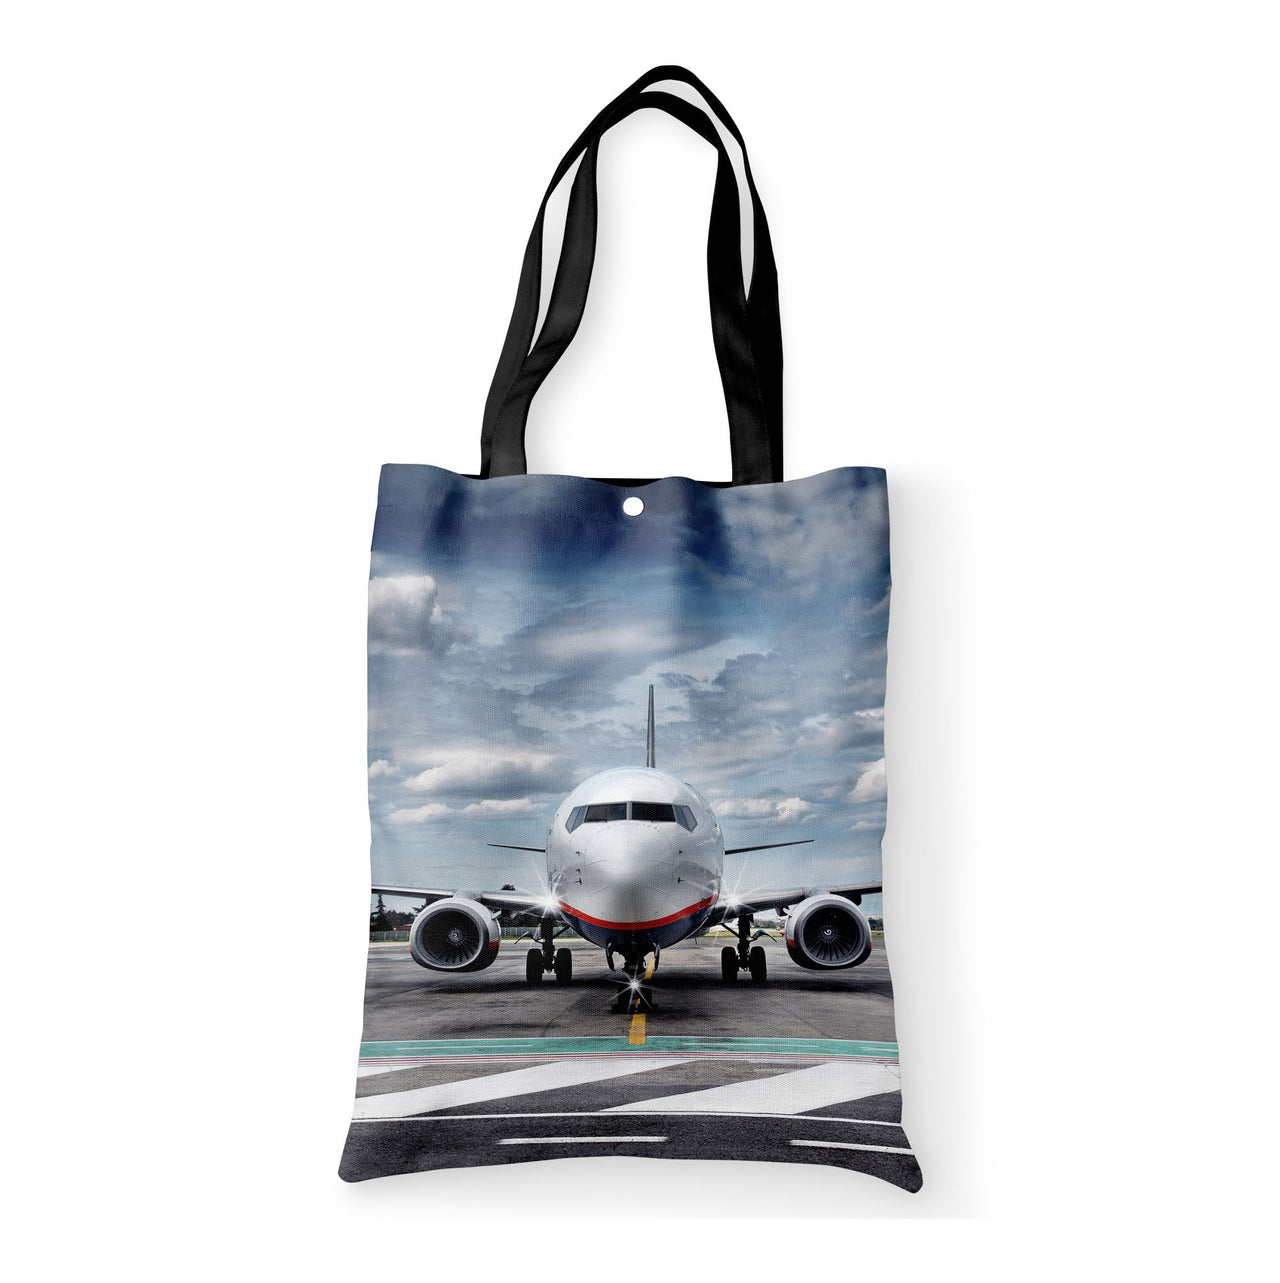 Amazing Clouds and Boeing 737 NG Designed Tote Bags